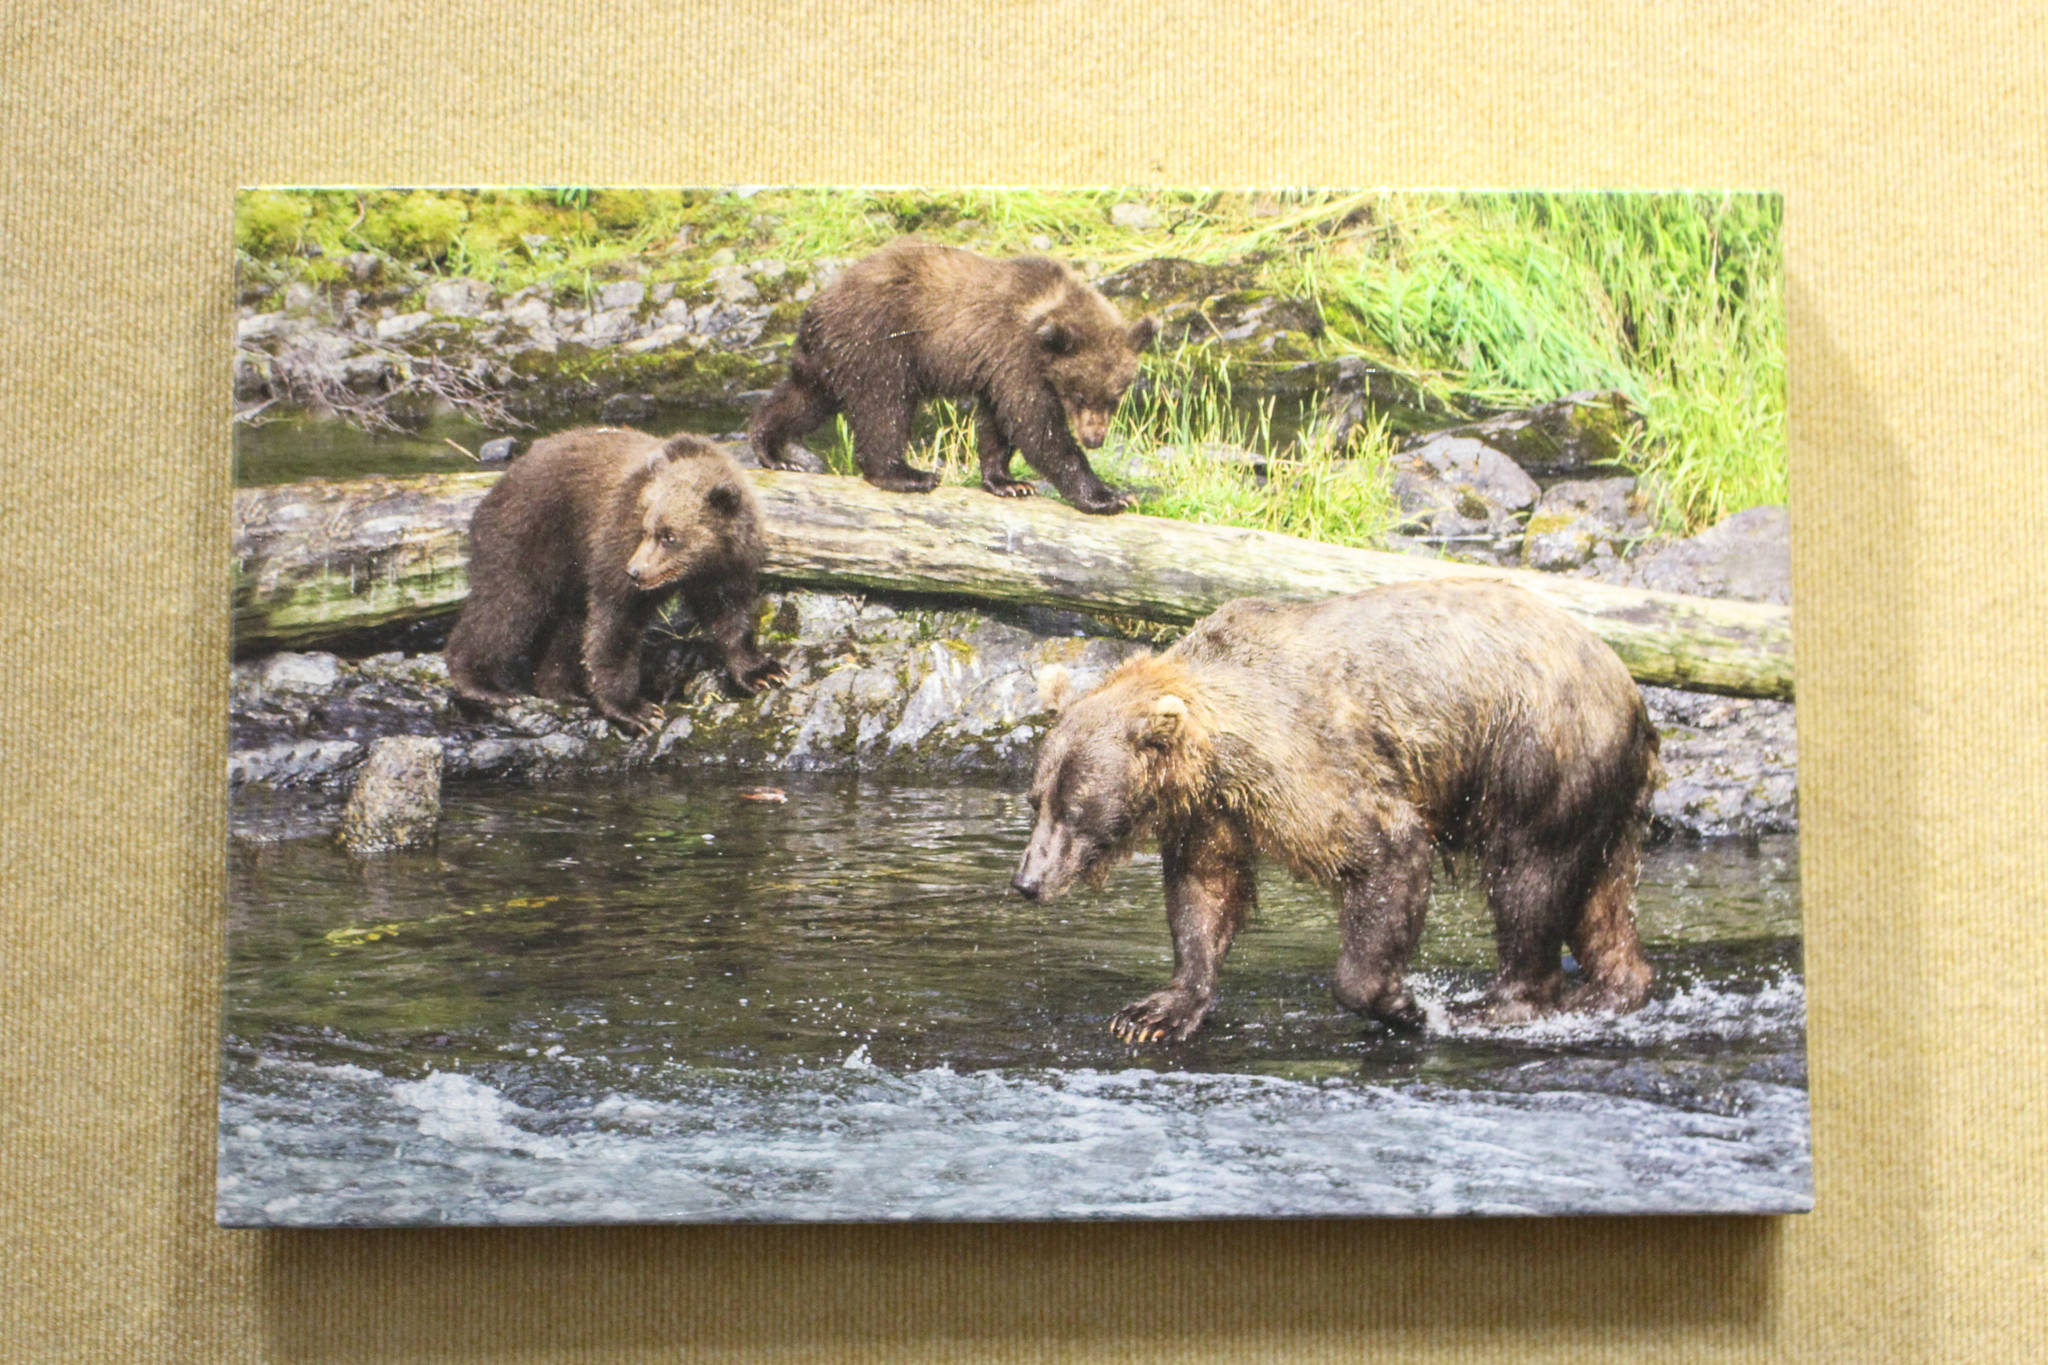 A photograph on canvas by Mary Frische and Tom Collopy is on display at the Kenai Visitor and Cultural Center on Jan. 12, 2021. (Photo by Brian Mazurek/Peninsula Clarion)